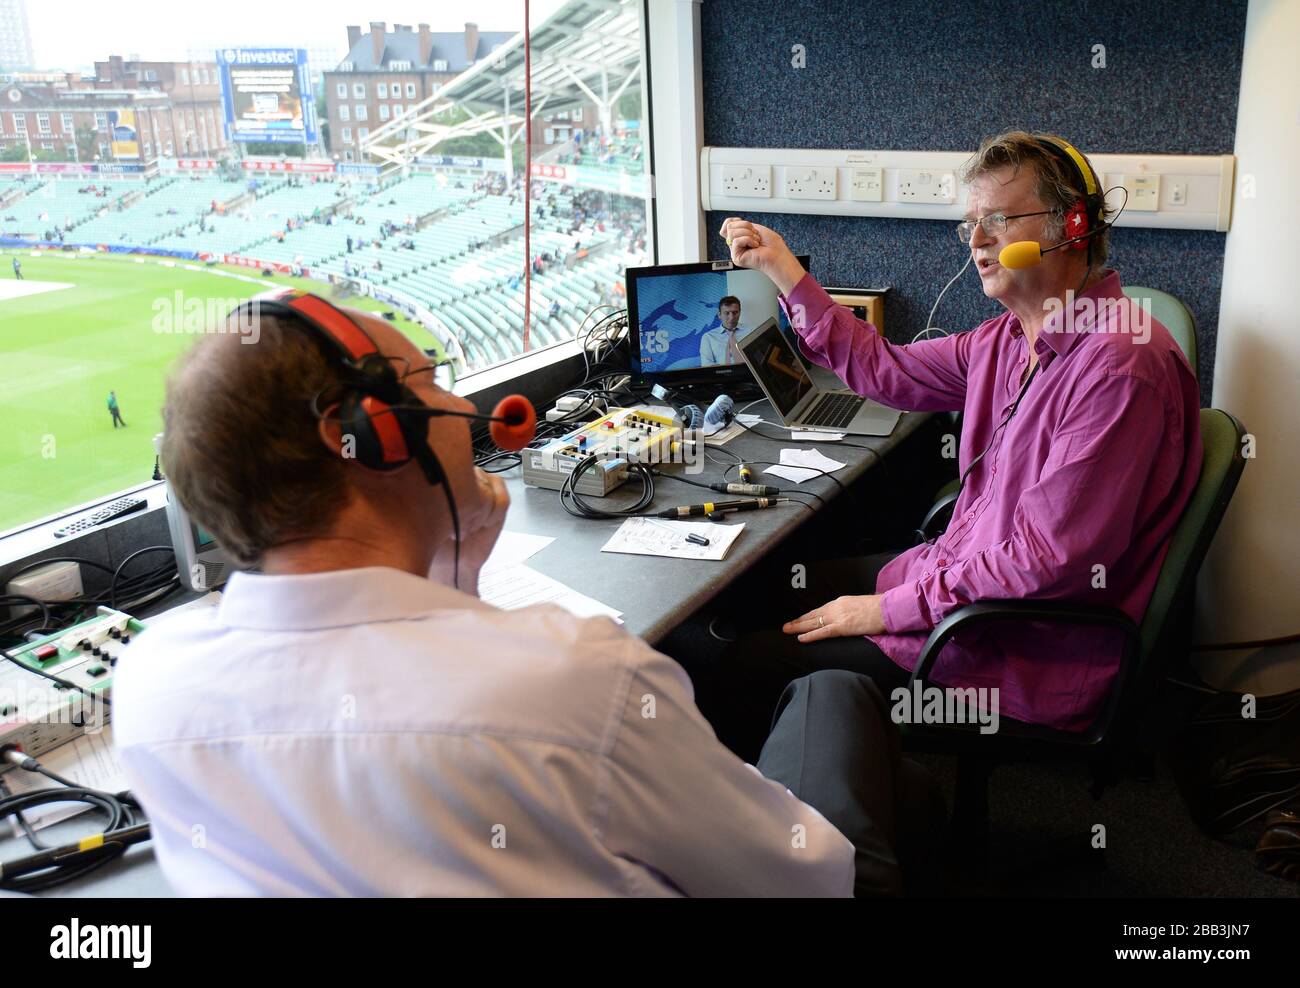 Paul Merton is interviewed by BBC's Jonathan Agnew on Test Match Special's 'From the Boundary's Edge' on day four of the Fifth Ashes test at the Kia Oval Stock Photo